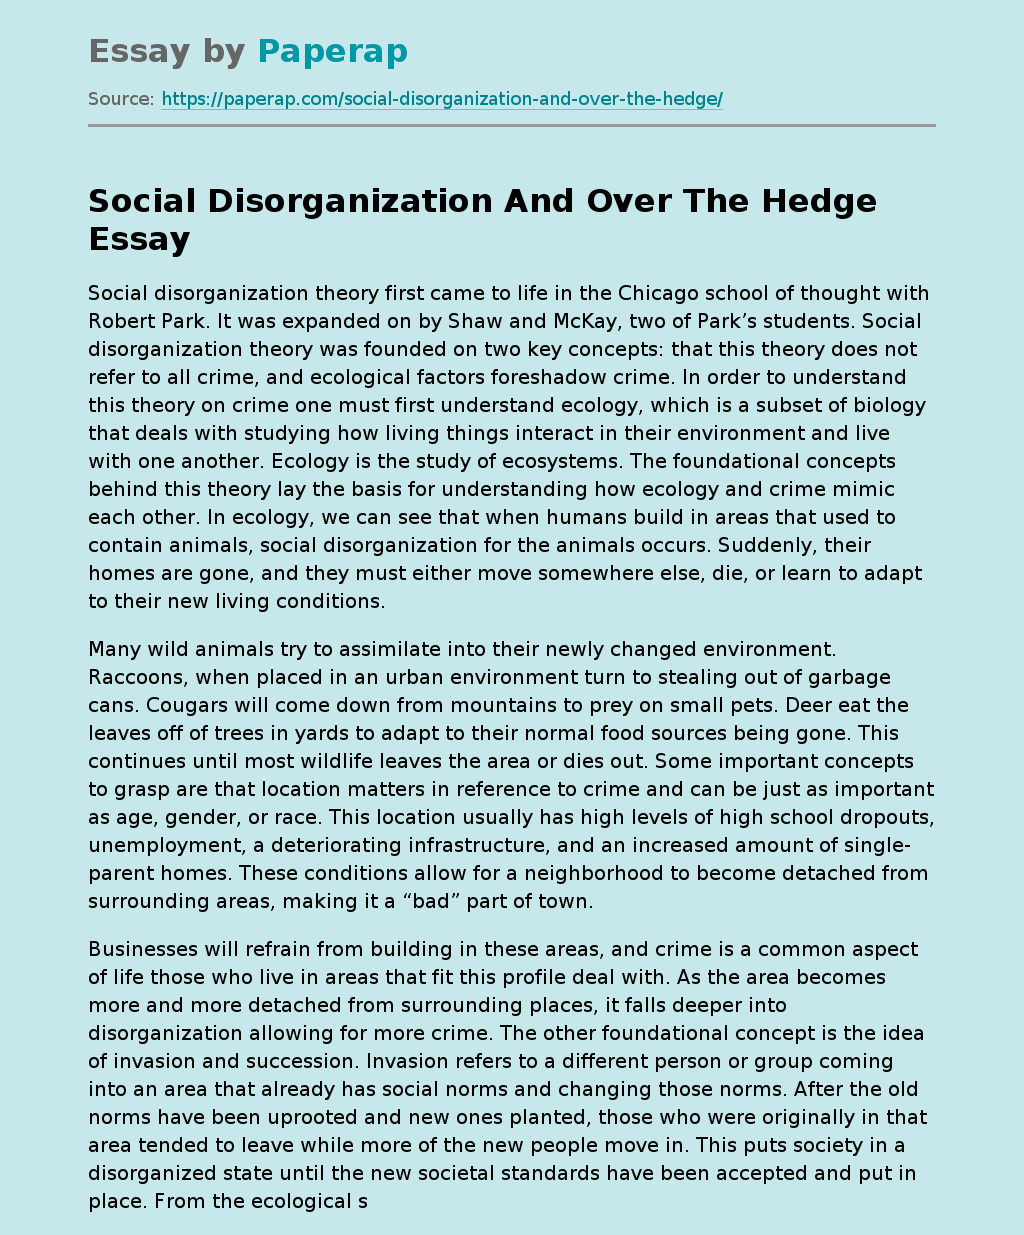 Social Disorganization And Over The Hedge